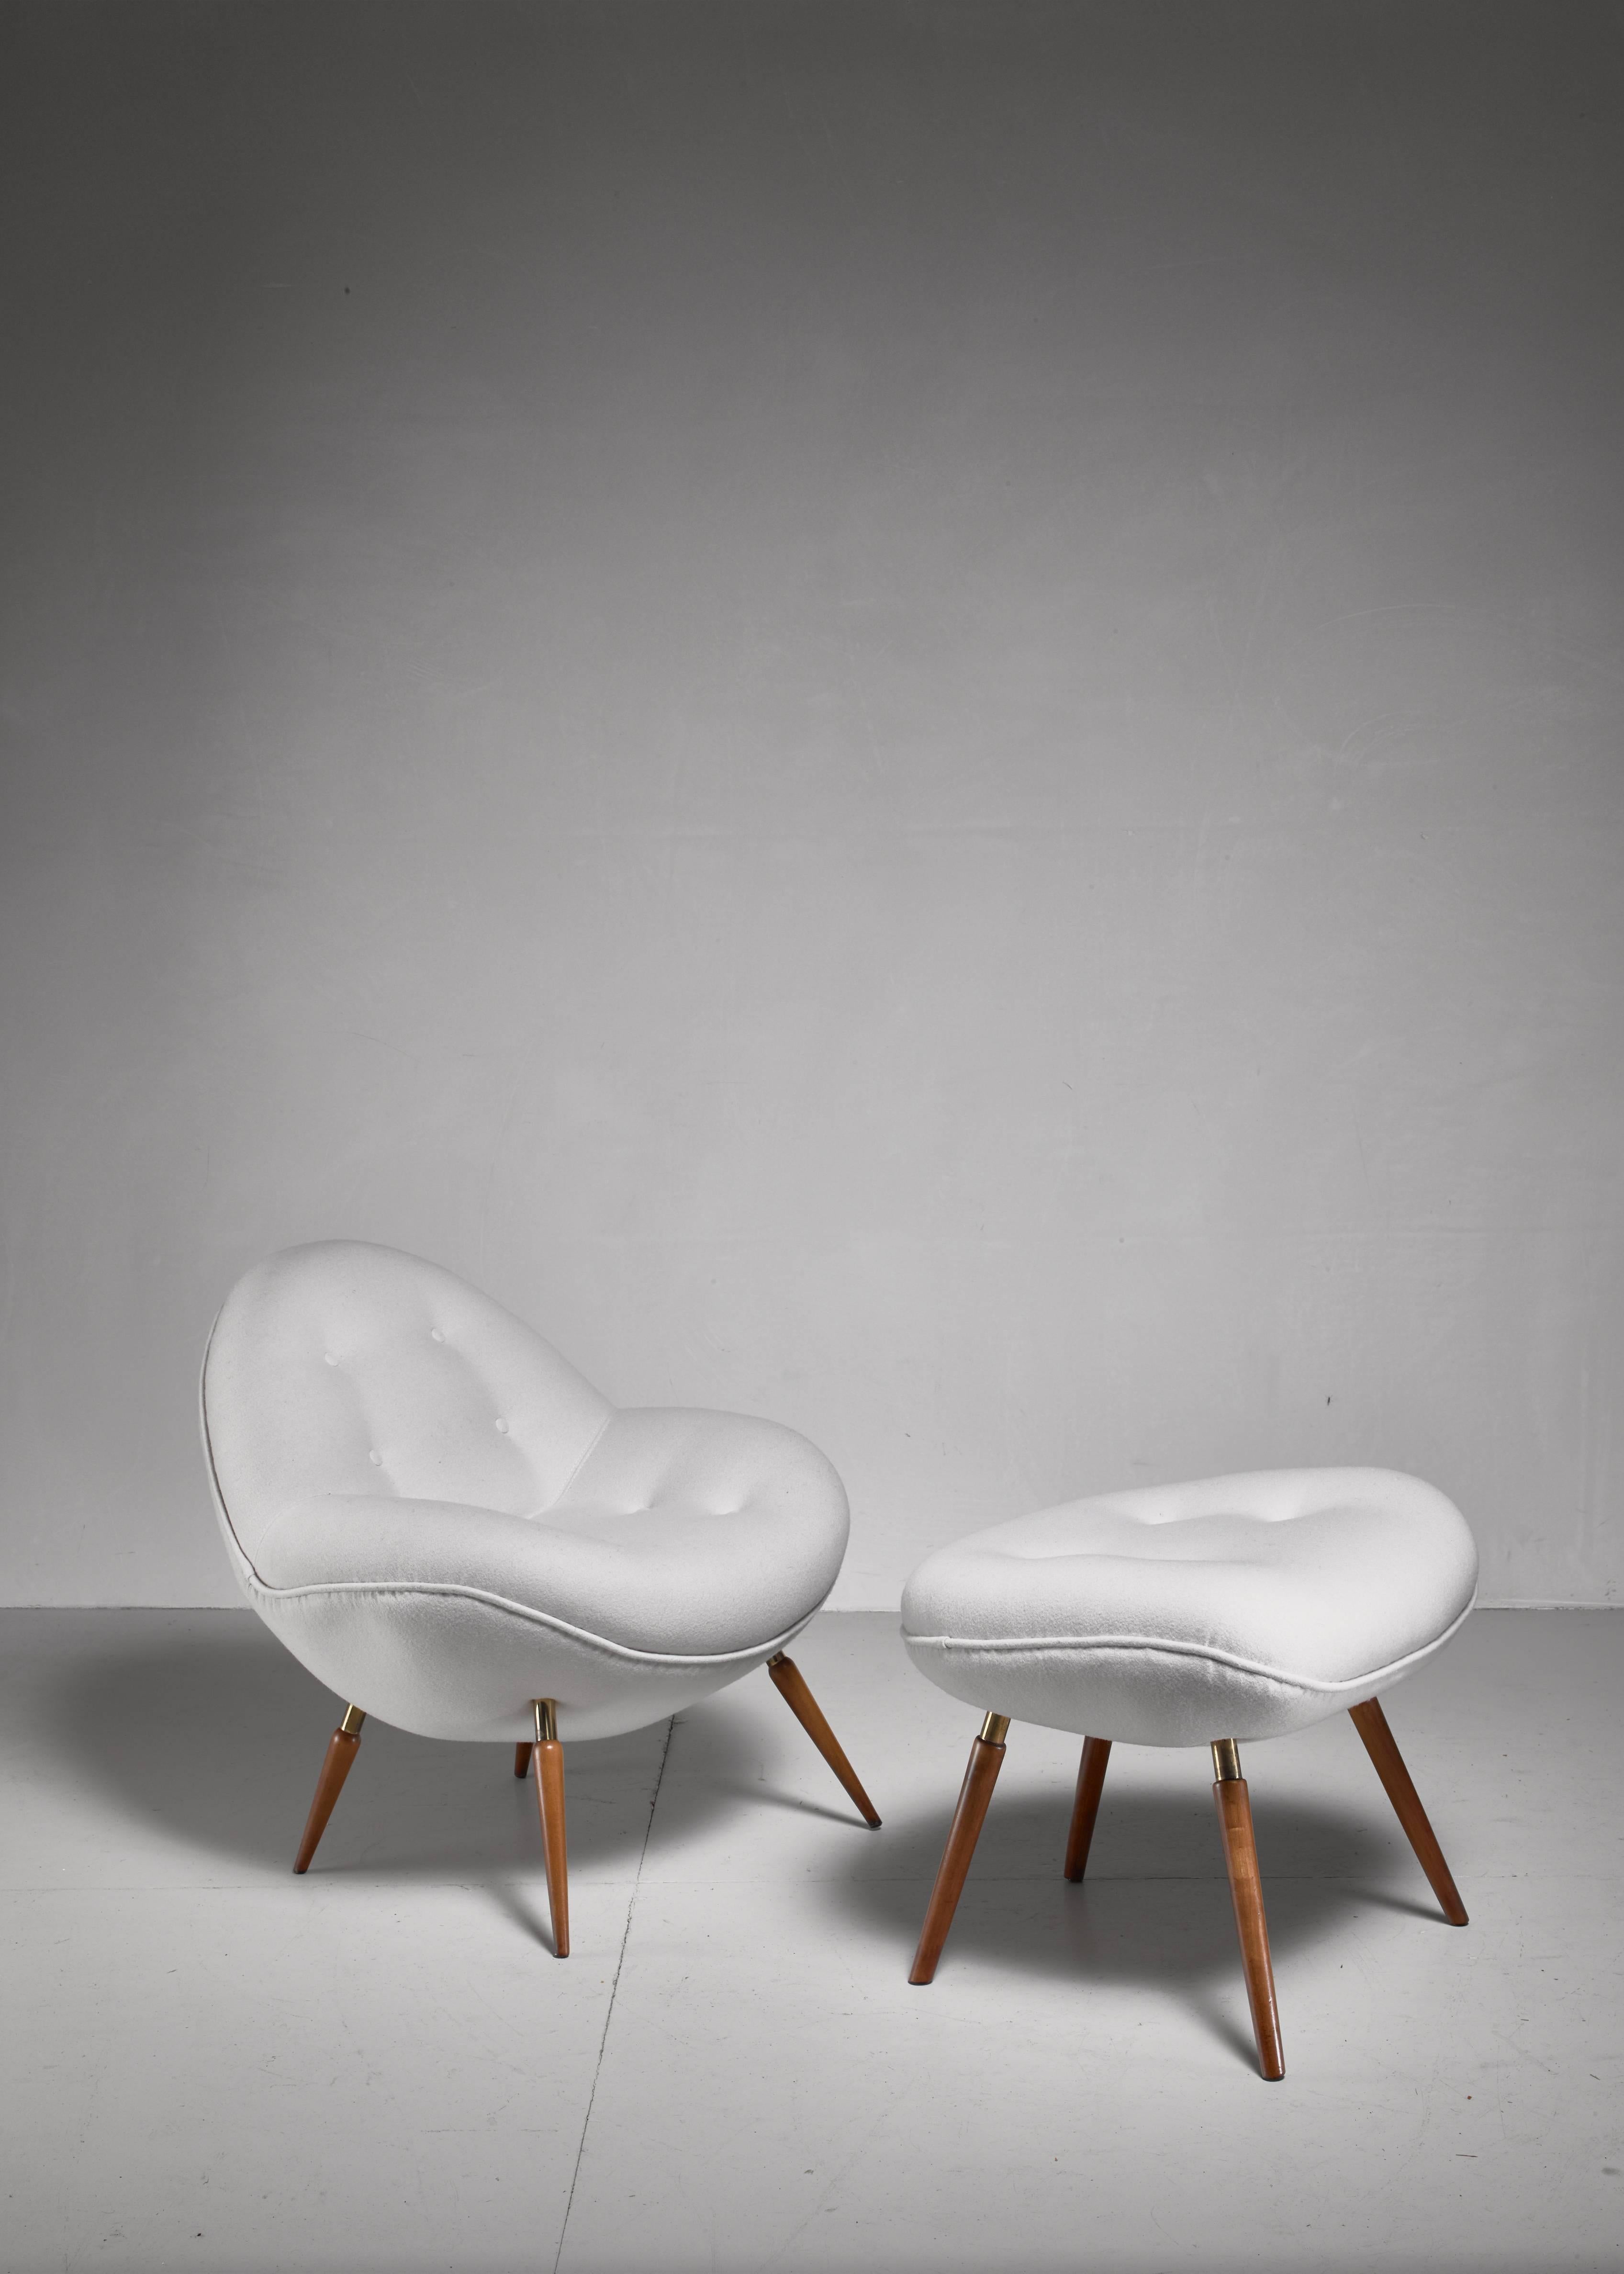 A Fritz Neth 'Schalensessel' chair for Correcta Werke with a matching hocker. The seating in the shape of an egg shell rests on four tapering legs made of wood and brass.

Both pieces are reupholstered with off-white Vilano wool from Deploeg